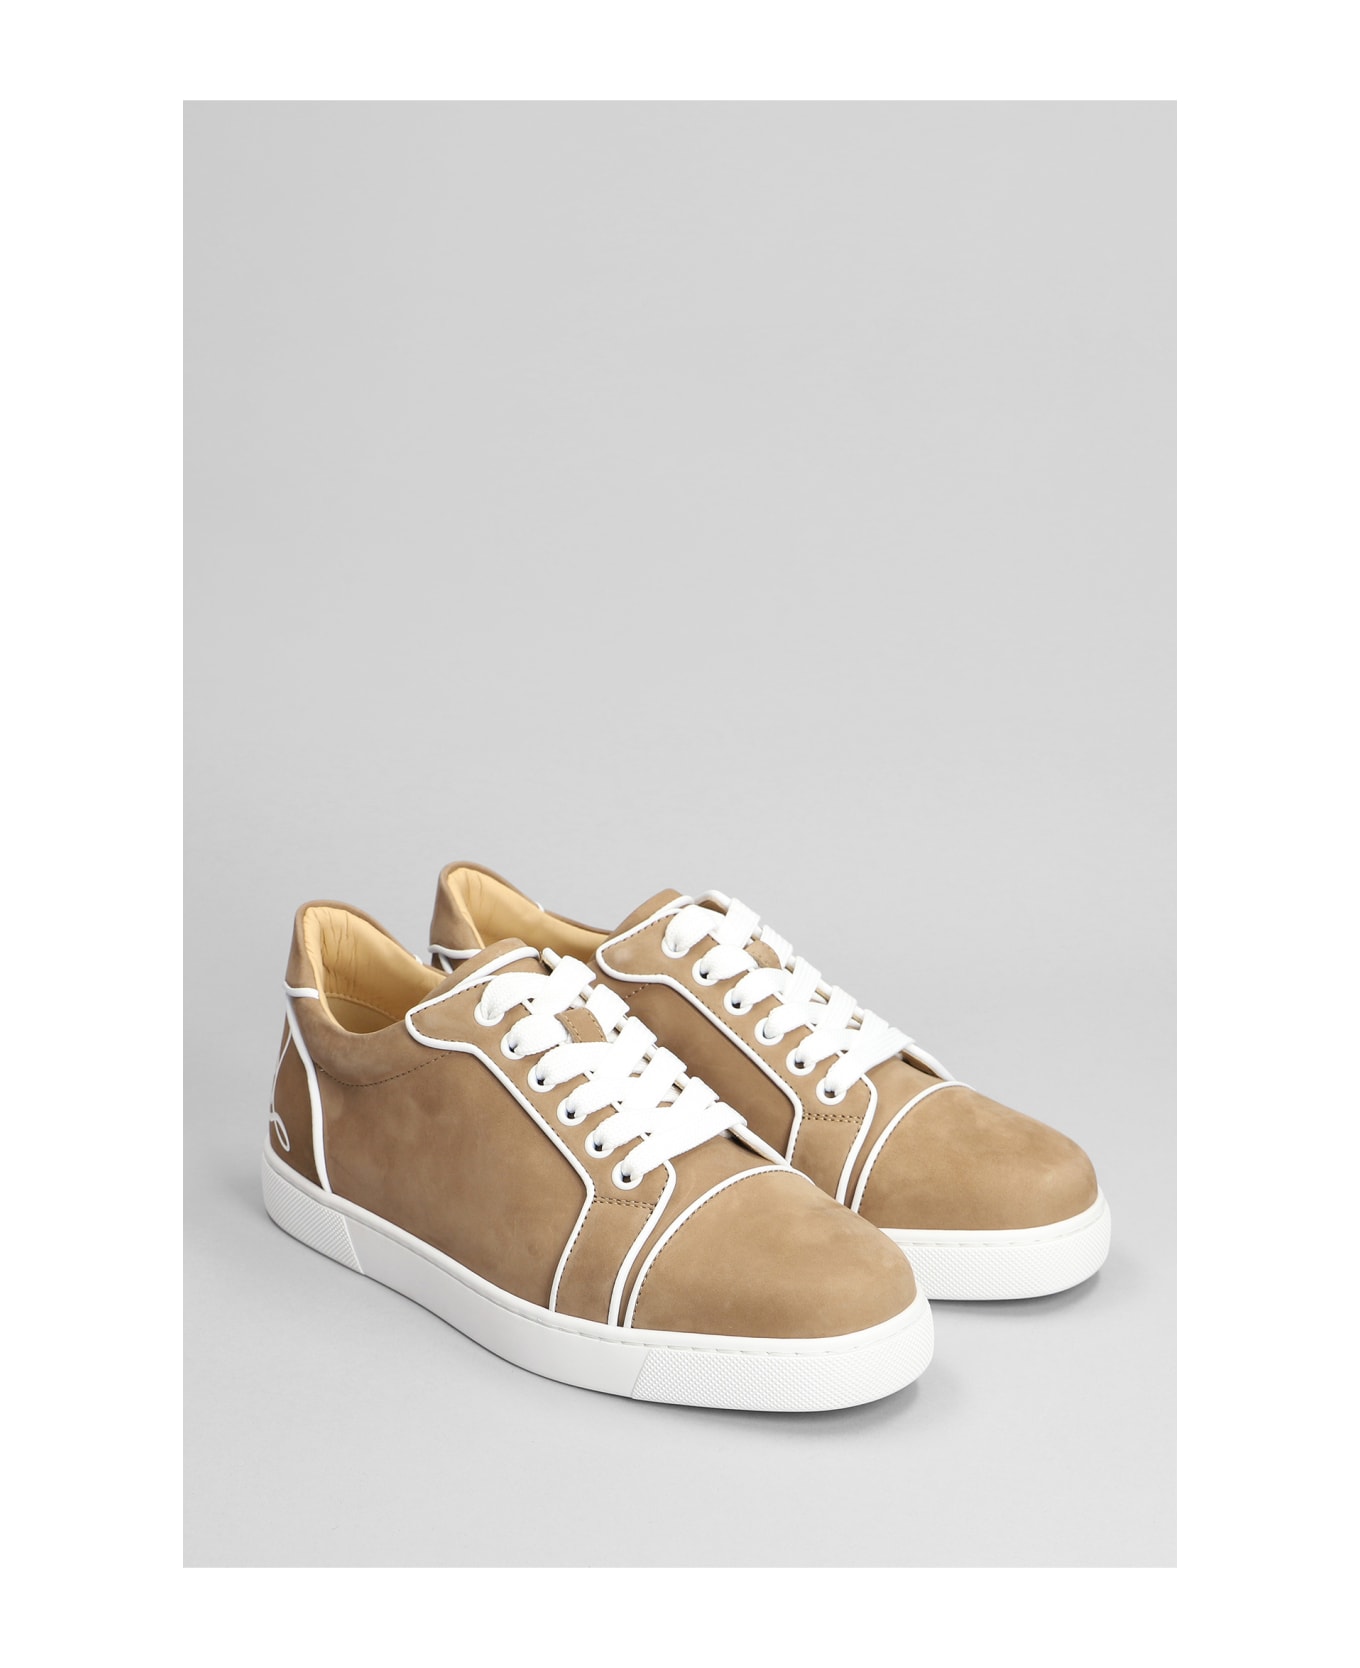 Christian Louboutin Suede Sneakers - ROCA スニーカー